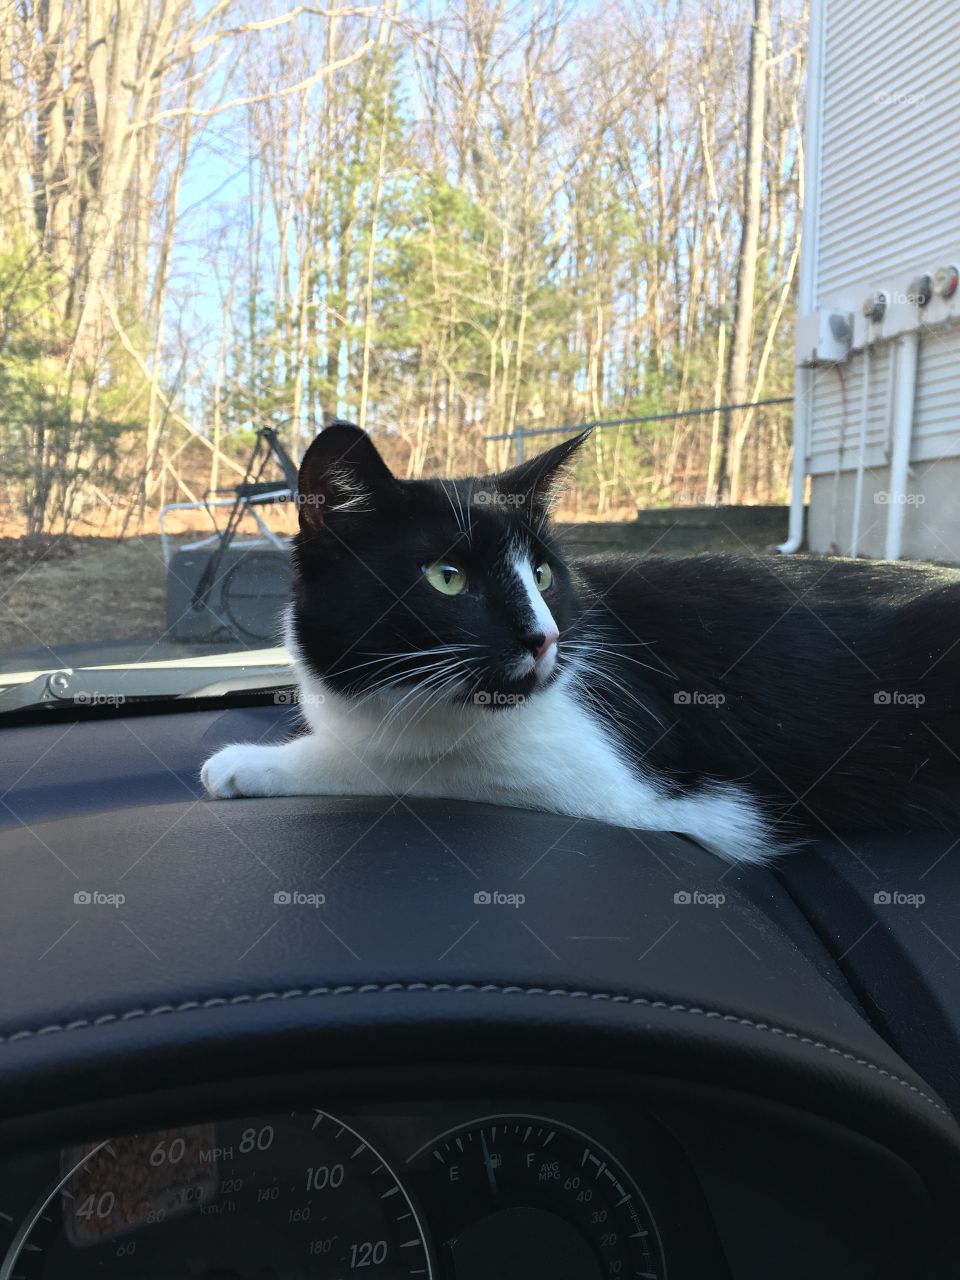 Kitty in the car